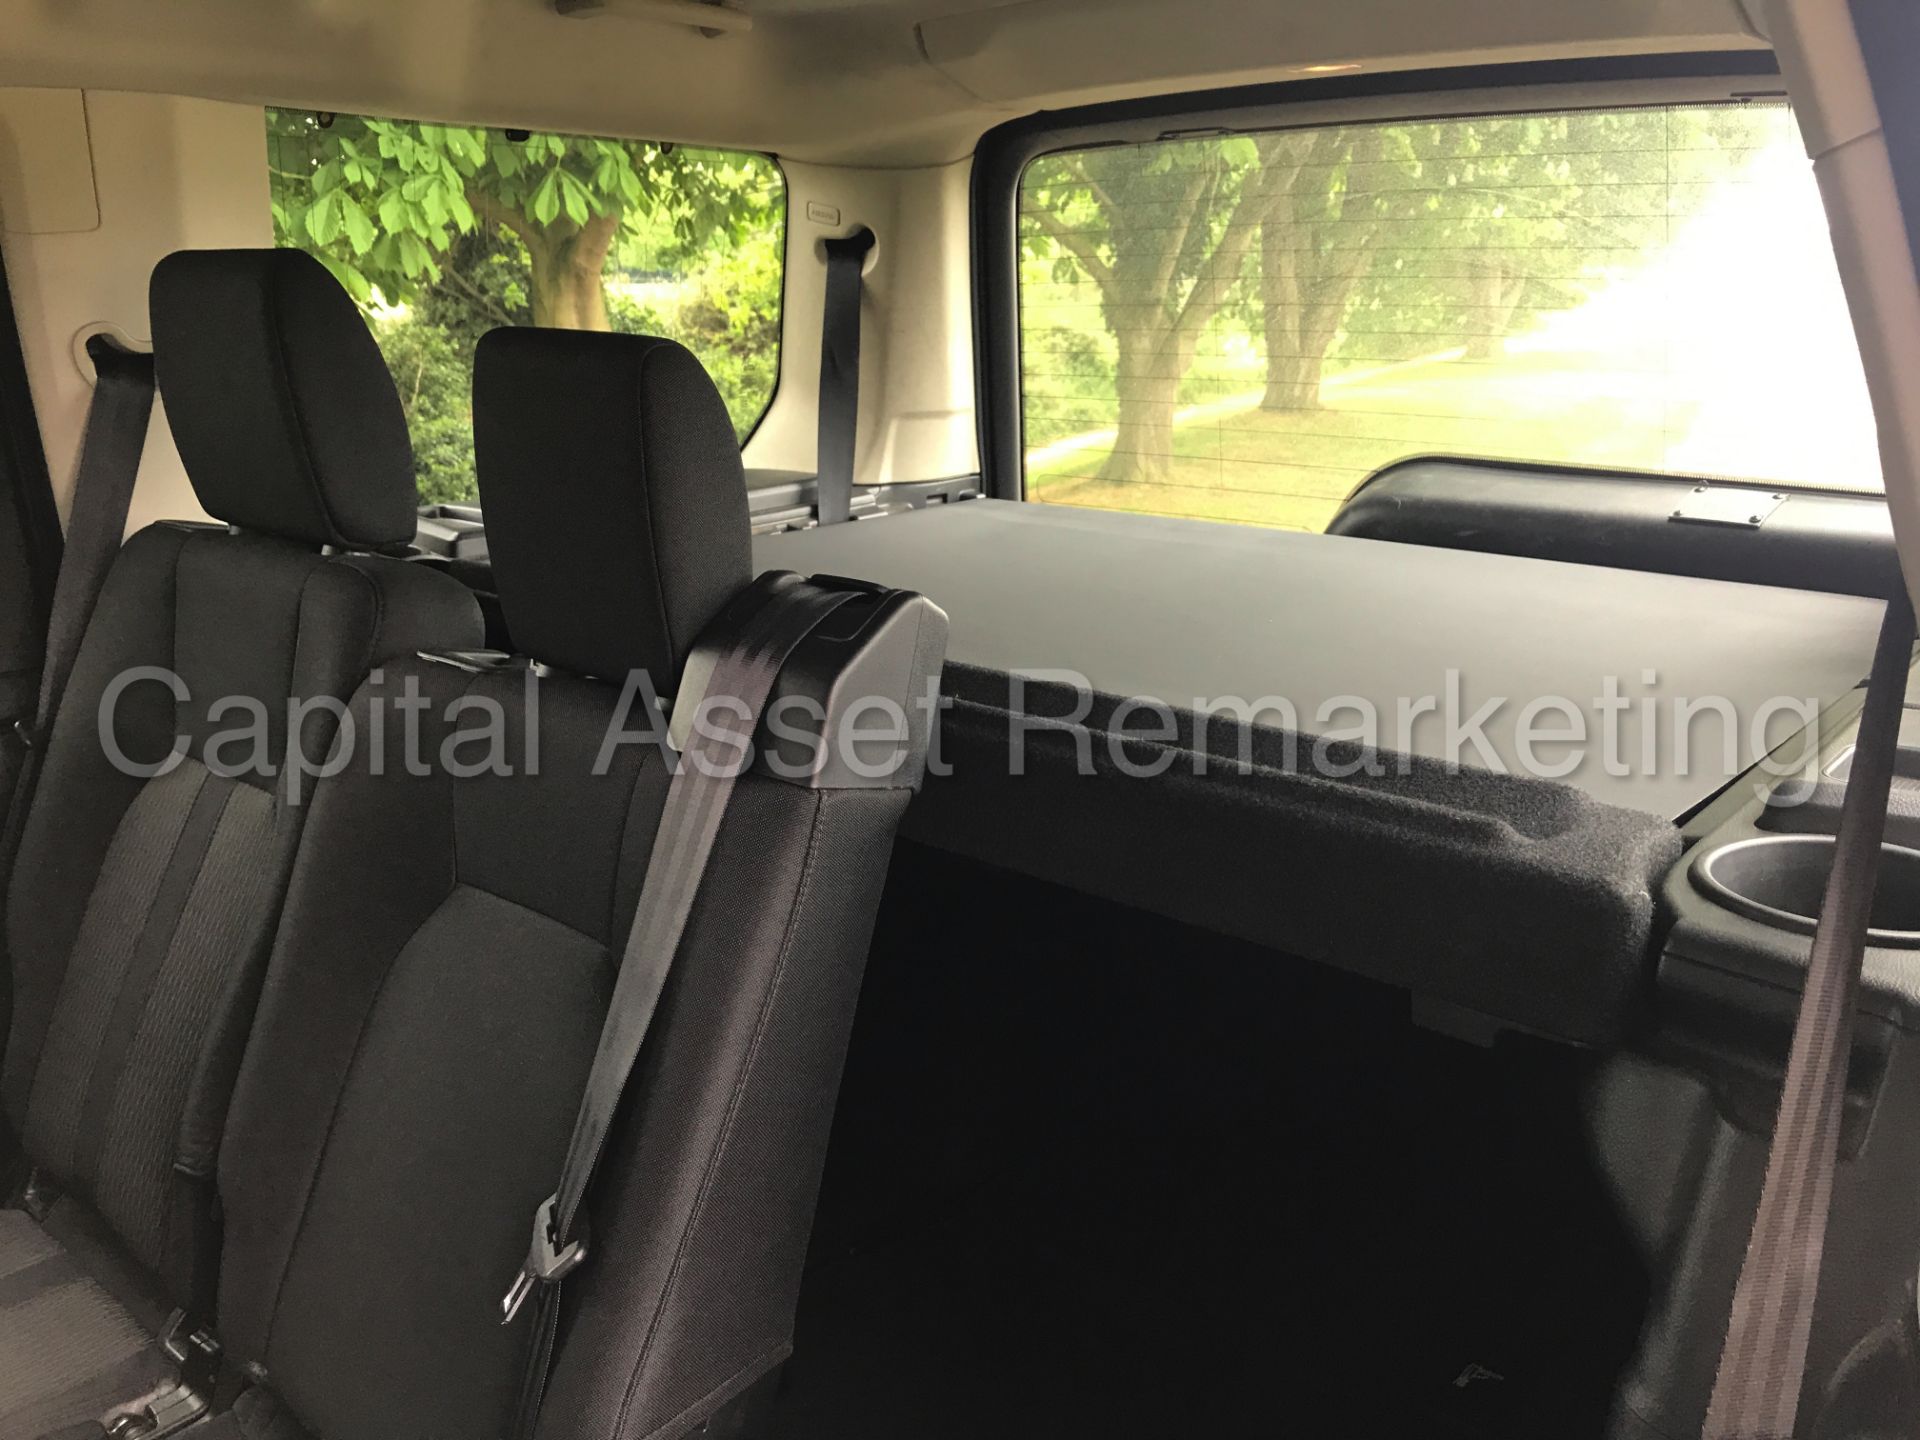 (On sale) LAND ROVER DISCOVERY 4 (2014 MODEL) '3.0 SDV6 -AUTO- 255 BHP - 7 SEATER'(1 OWNER FROM NEW) - Image 34 of 42